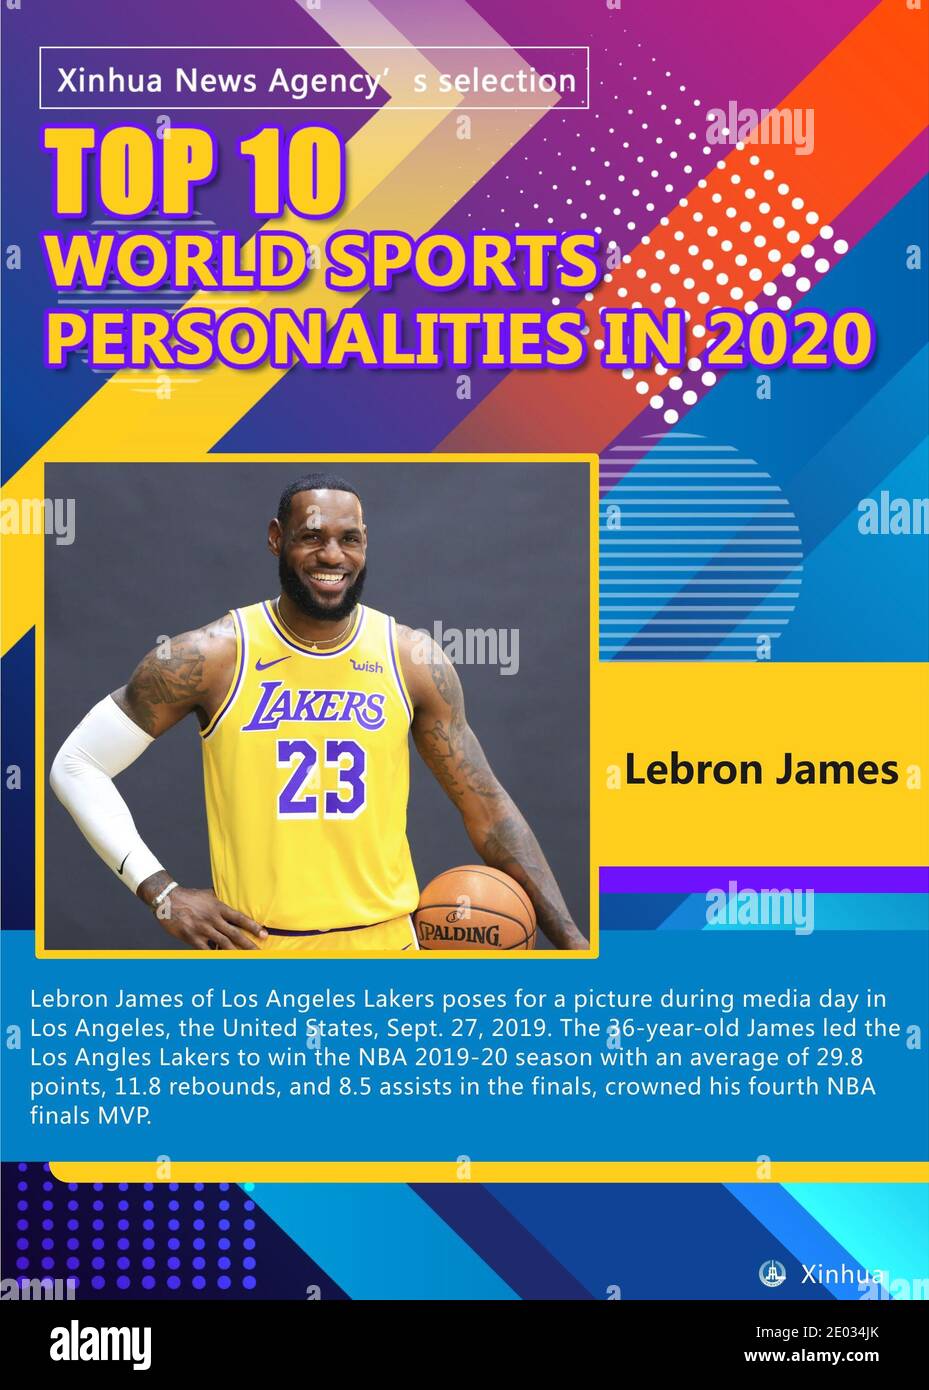 Beijing, USA. 27th Sep, 2019. Lebron James of Los Angeles Lakers poses for a picture during media day in Los Angeles, the United States, Sept. 27, 2019. 36-year-old James led the Los Angles Lakers to win the NBA 2019-20 season with an average of 29.8 points, 11.8 rebounds, and 8.5 assists in the finals, crowned his fourth NBA finals MVP. Credit: Shi Manke/Xinhua/Alamy Live News Stock Photo